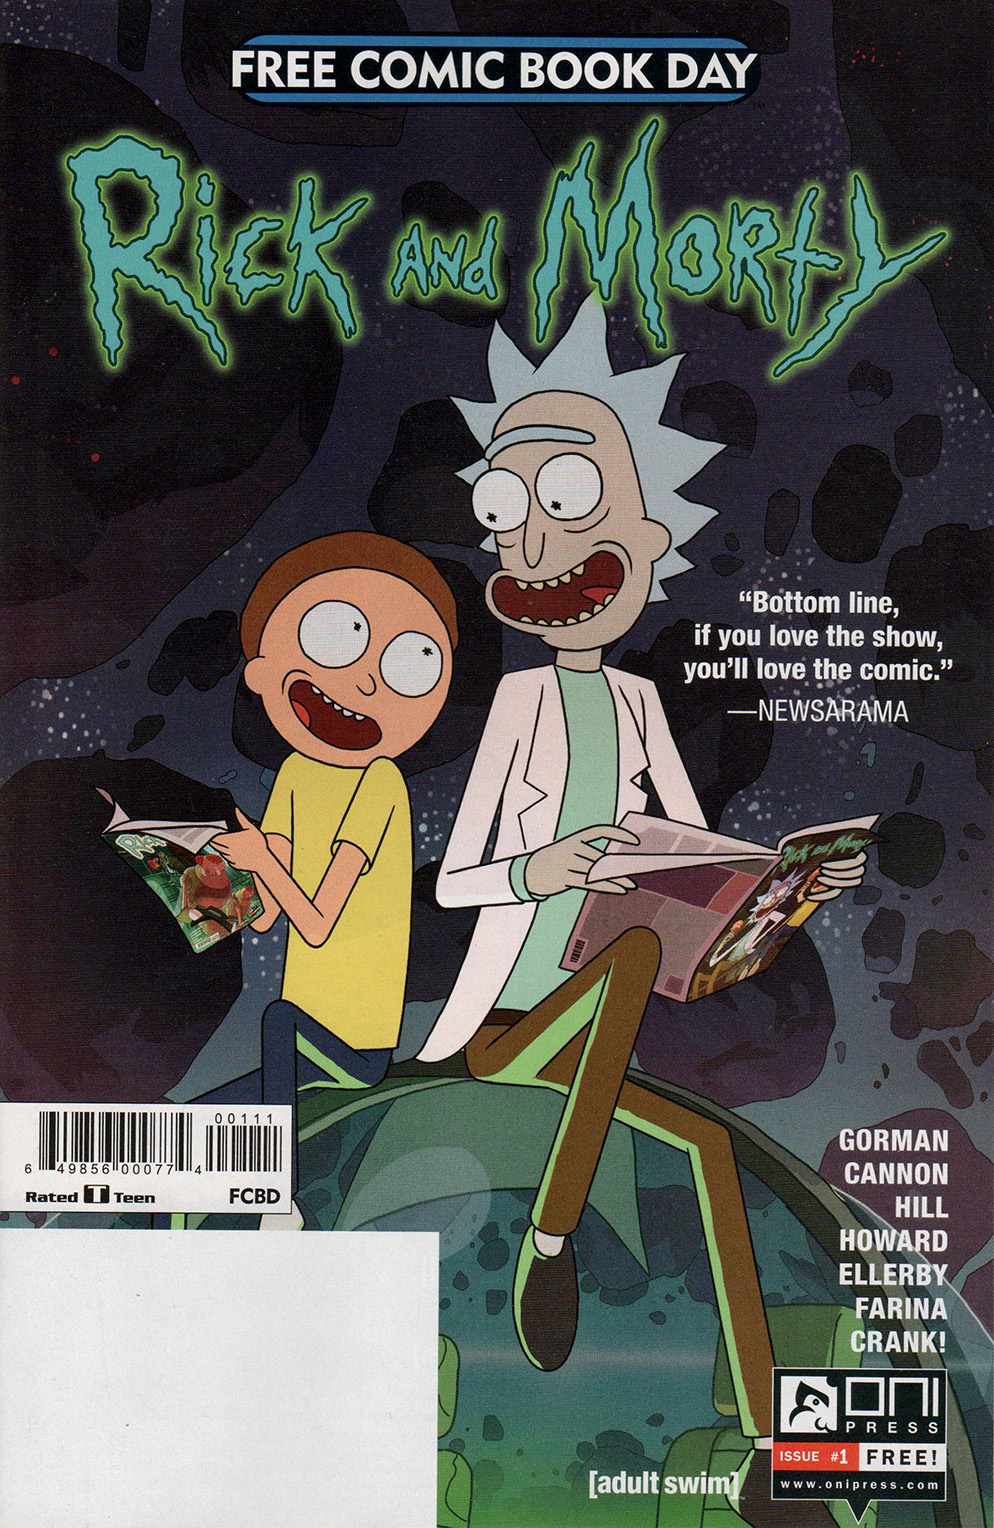 FCBD 2017 Collection: Chapter Rick-and-Morty - Page 1